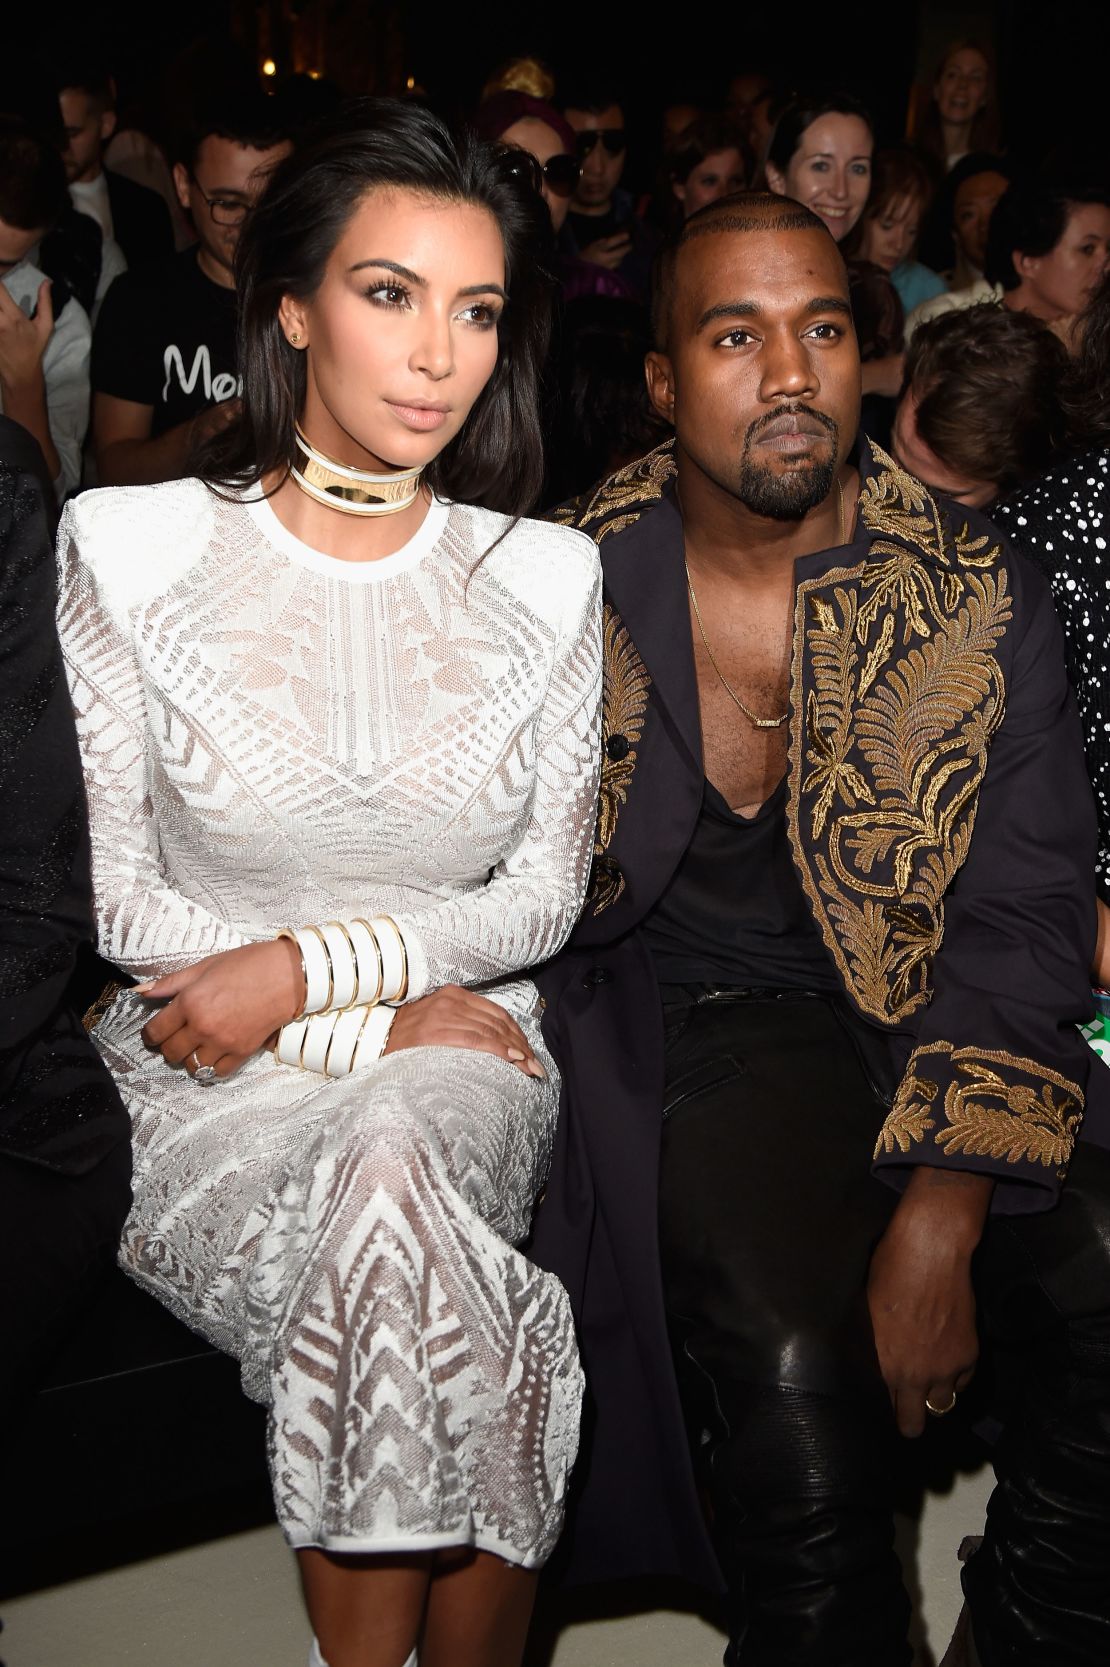 Kim Kardashian, with Kanye West here in 2014, was declared legally single last month.